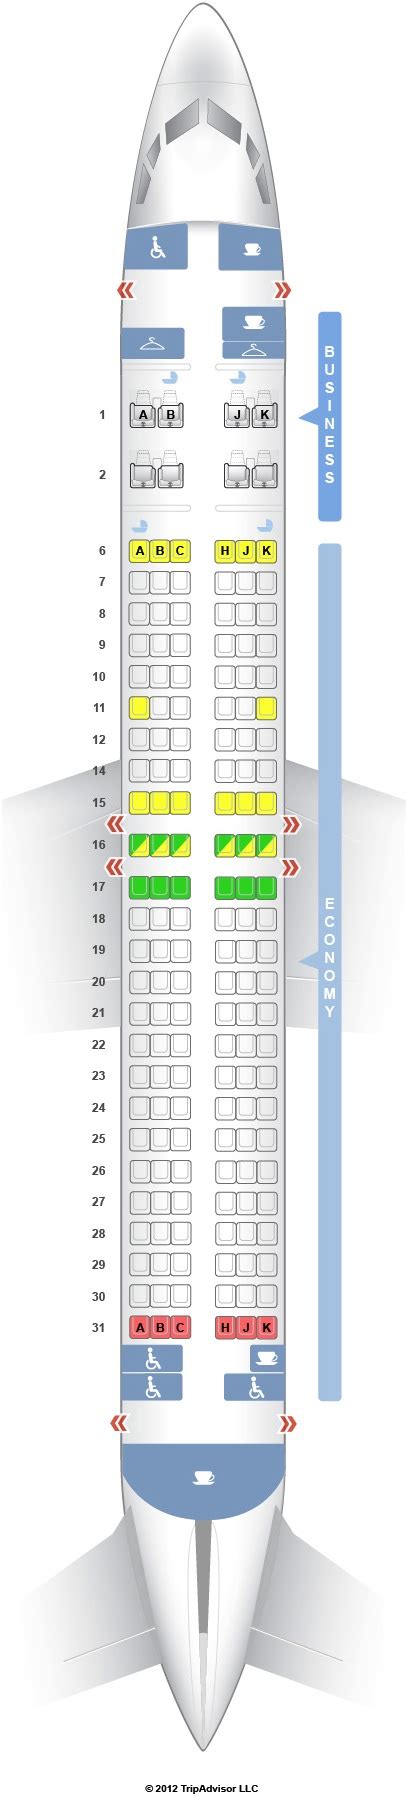 boeing 737-500 seat map china eastern